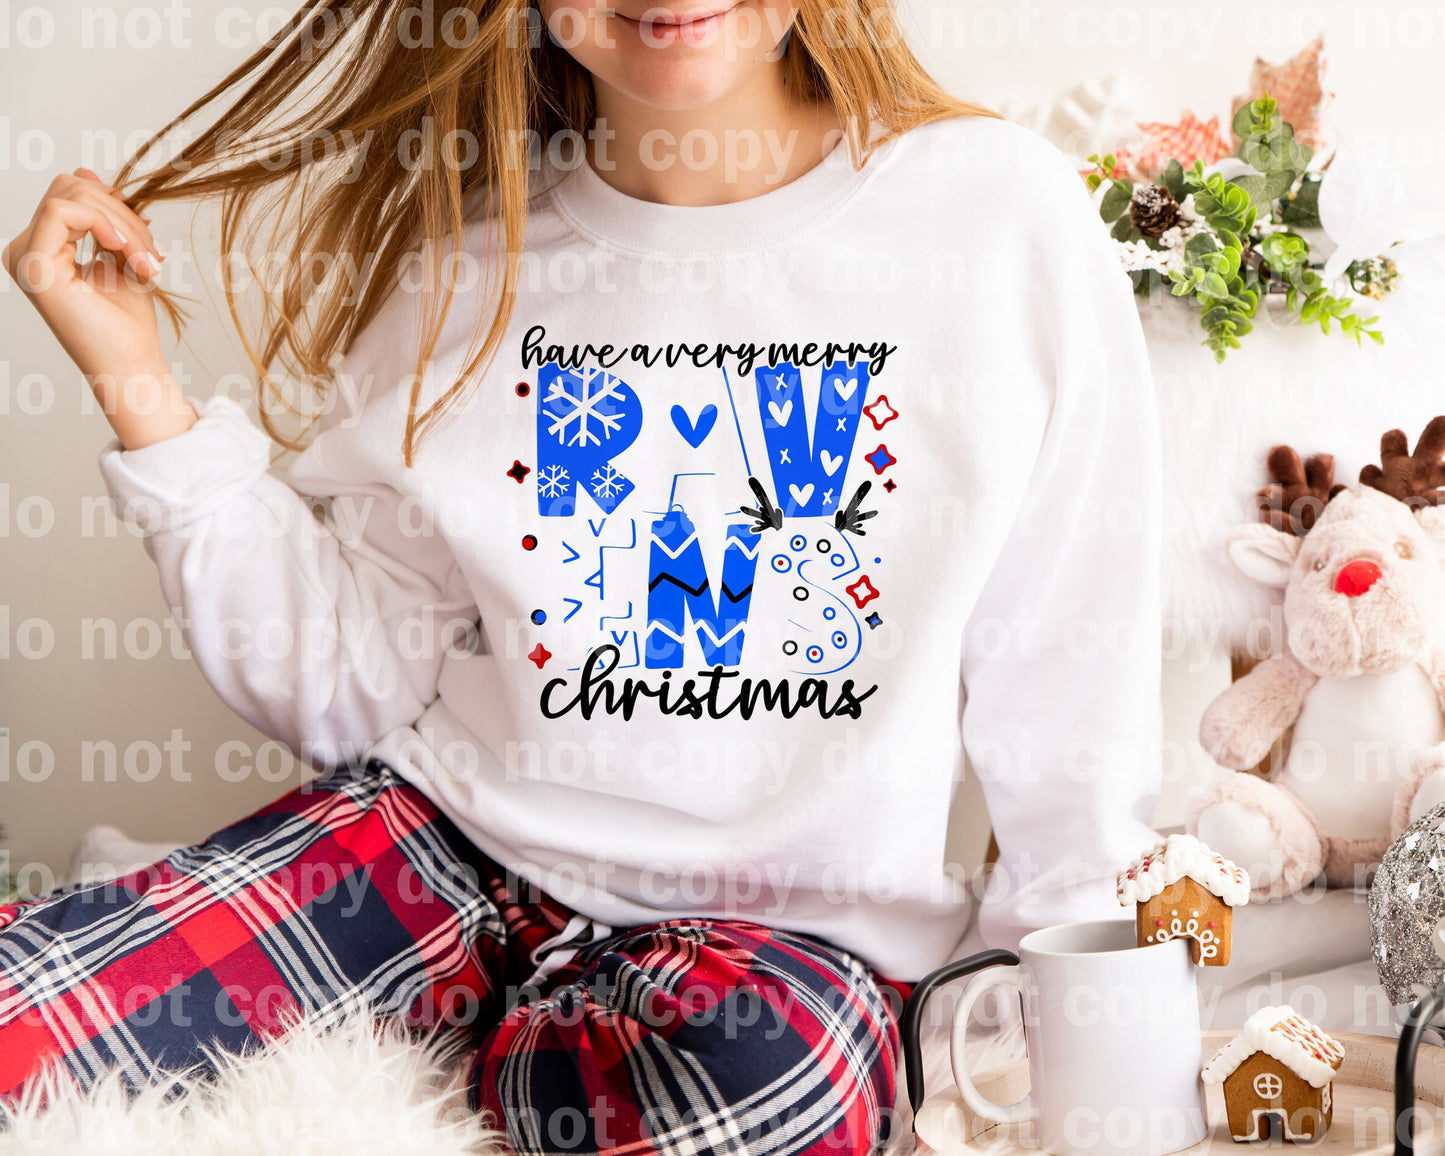 Have A Very Merry Ravens Christmas Dream Print or Sublimation Print